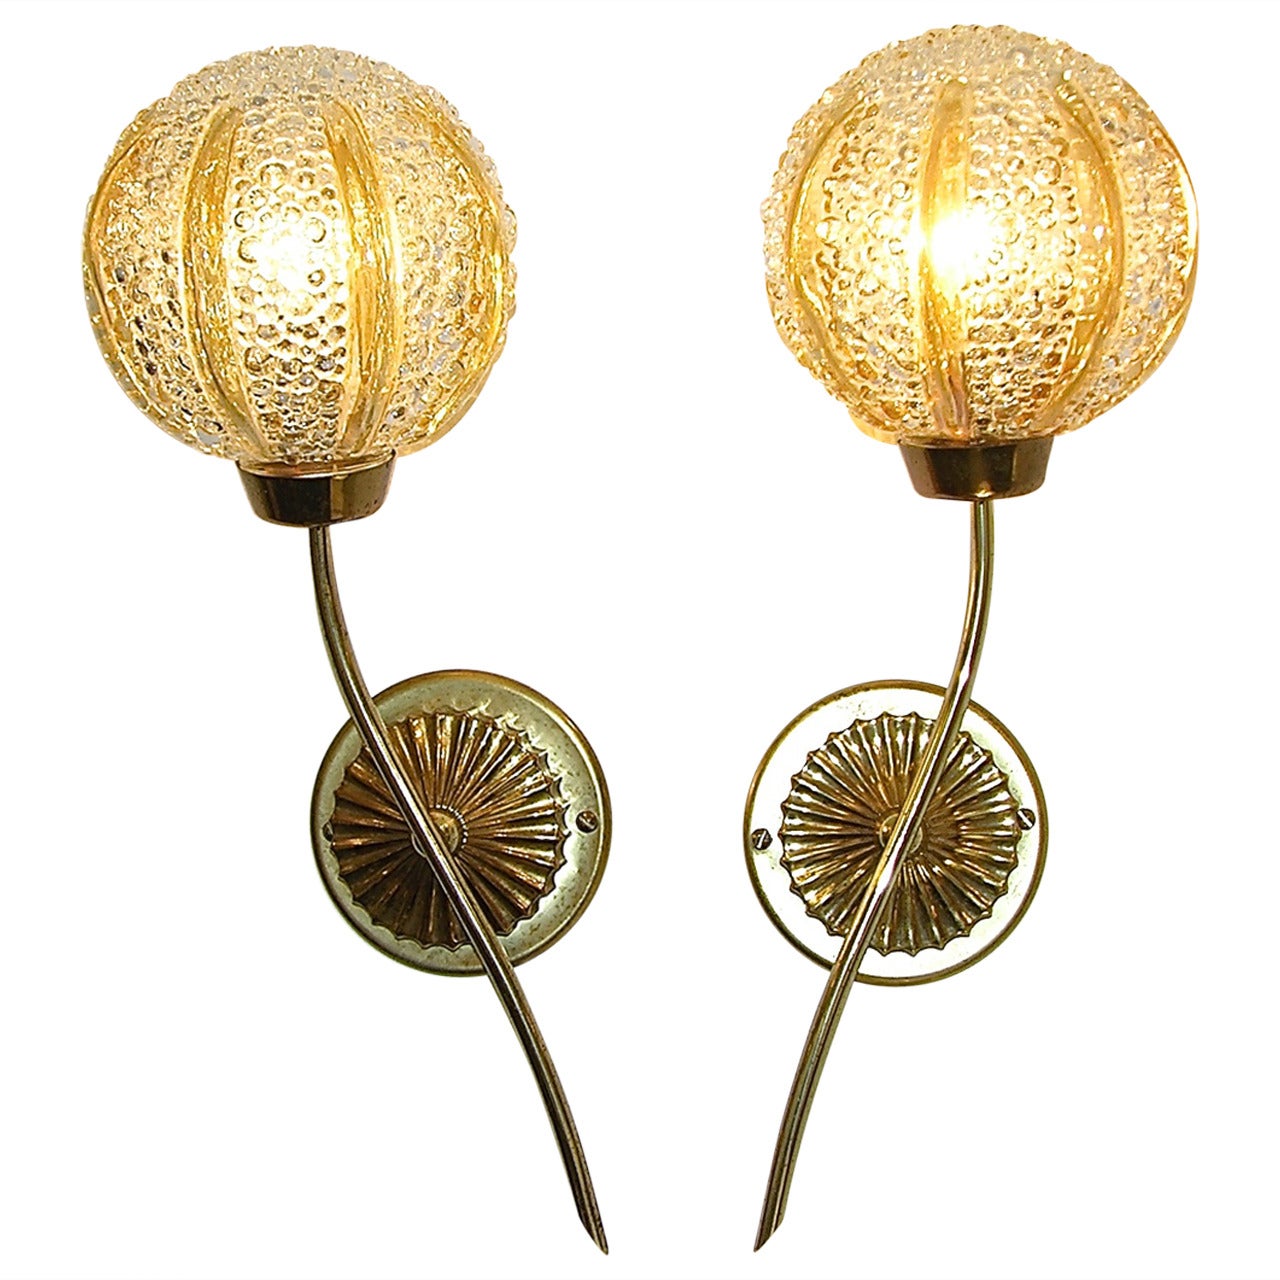 Barovier 1950s Delightful Pair of Textured Murano Glass Sconces